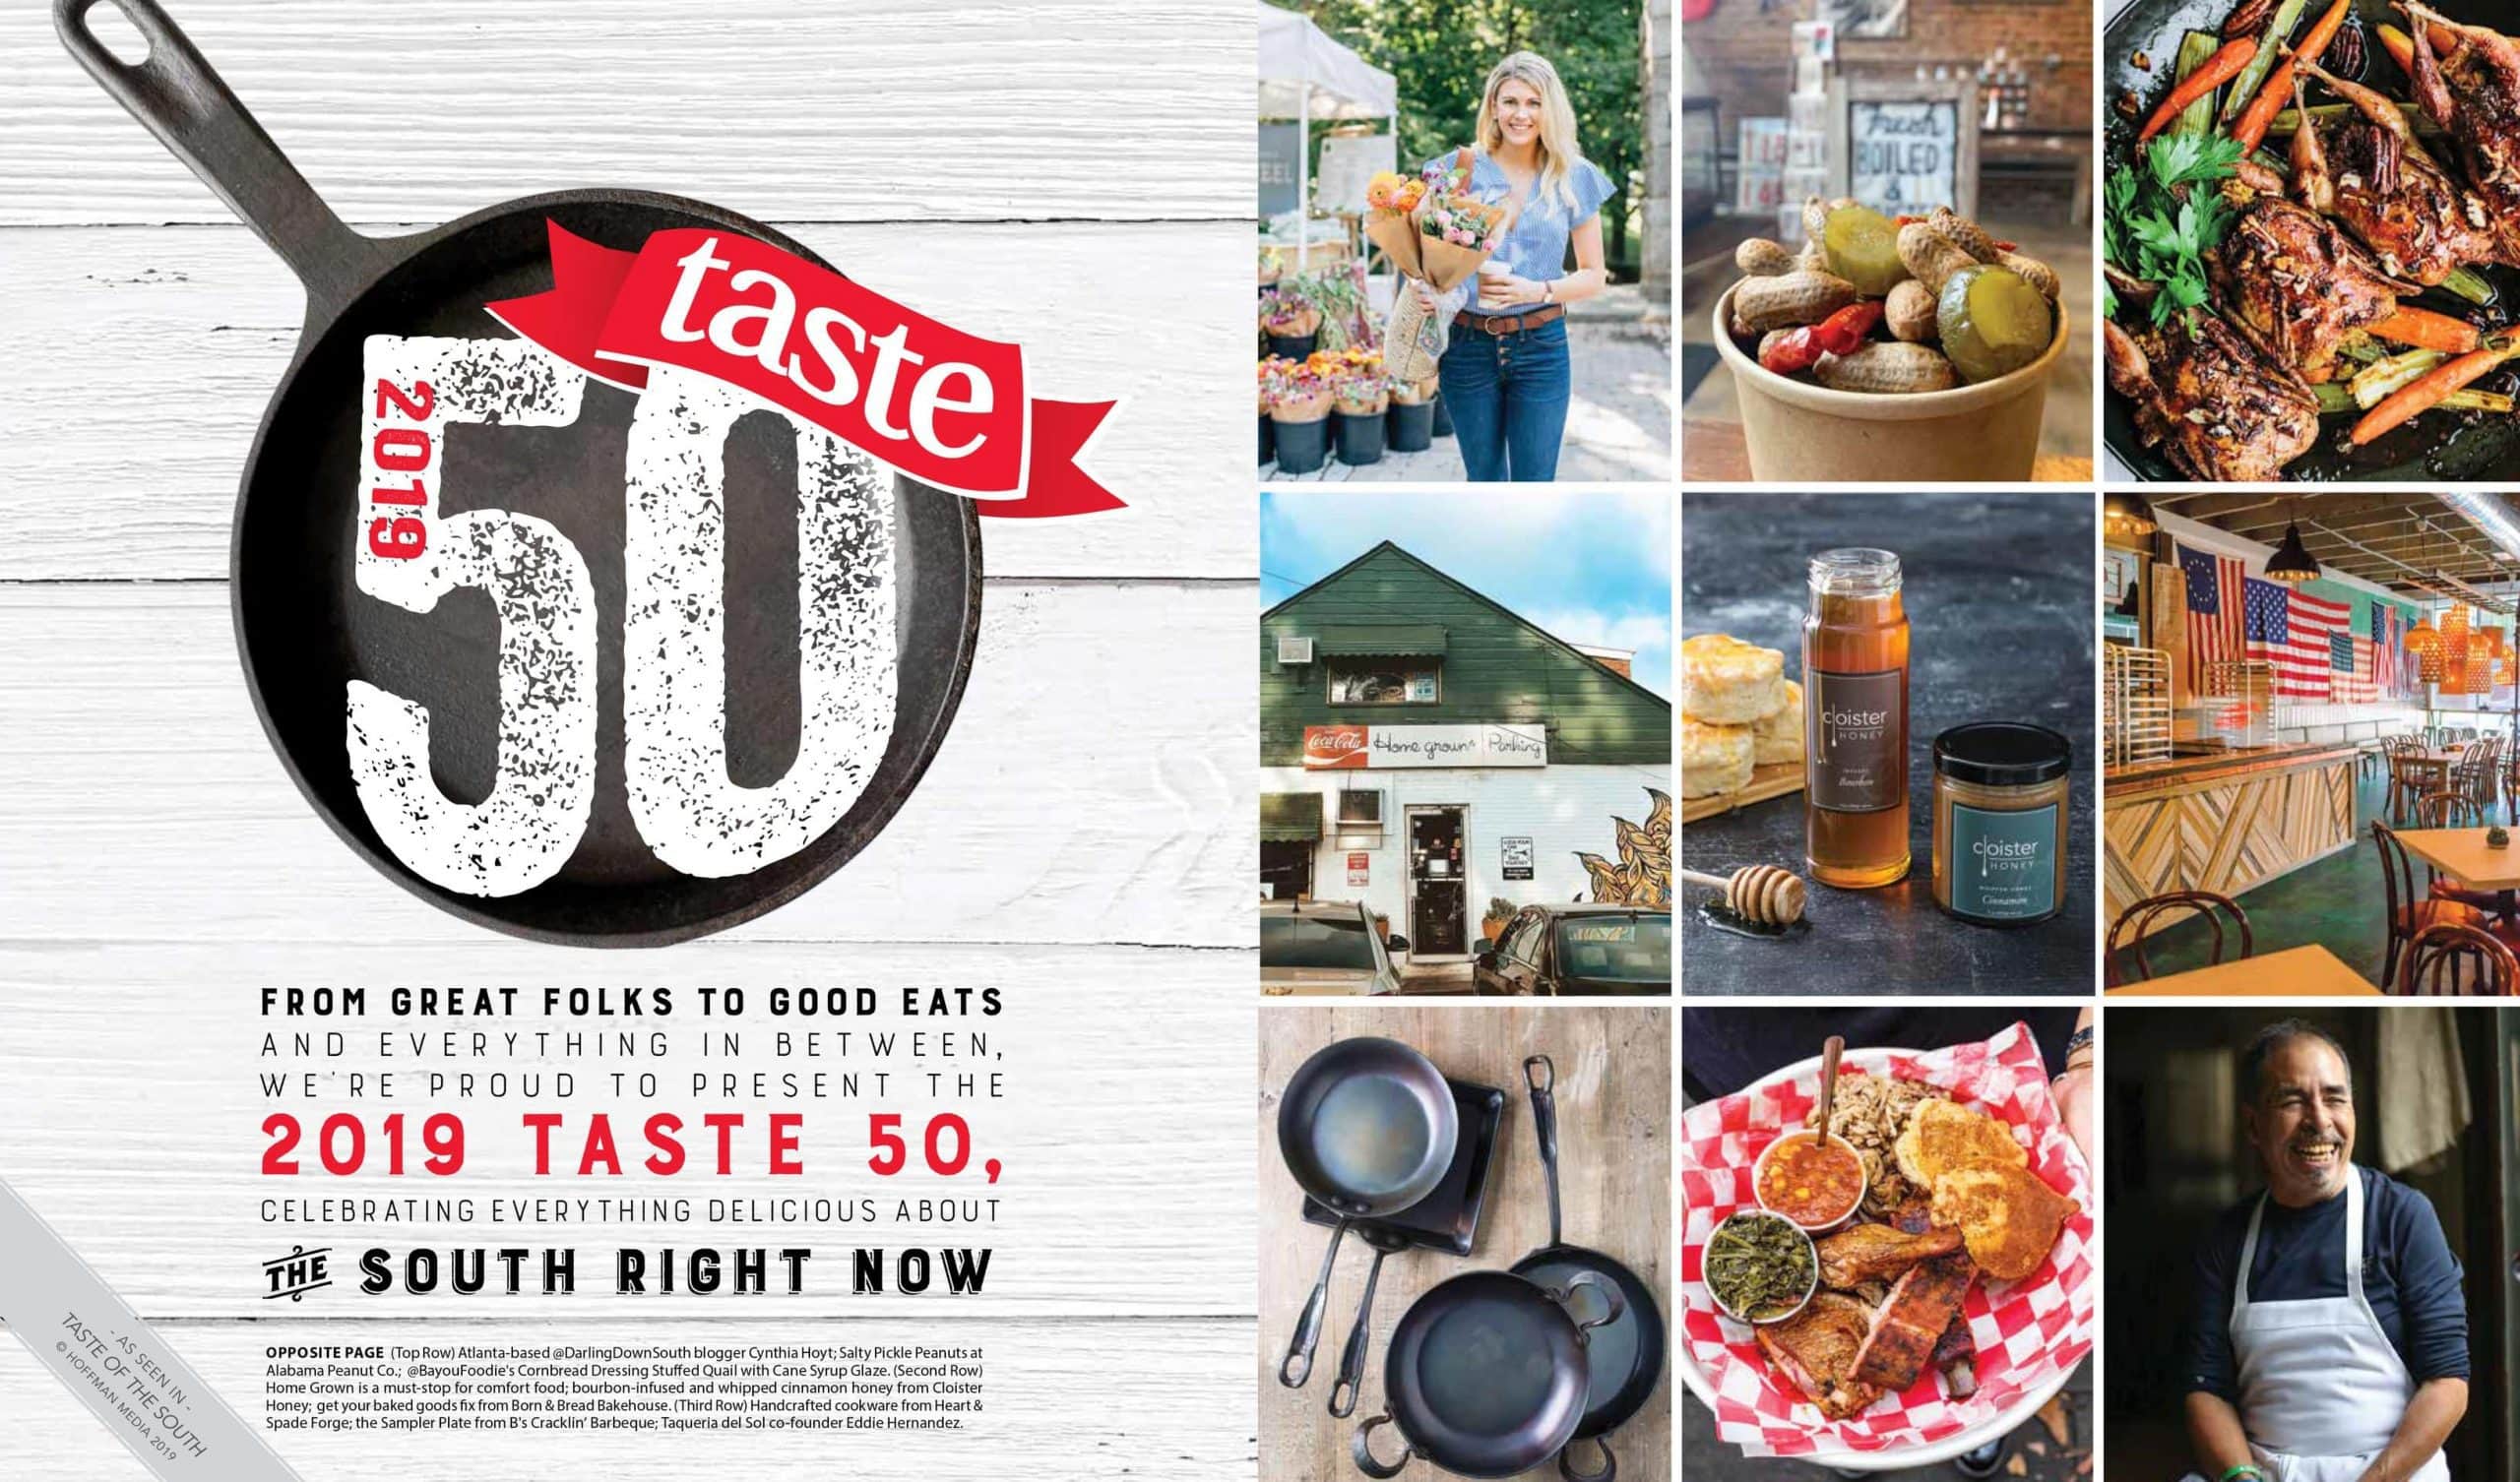 Hall's Top 50 Taste of the South